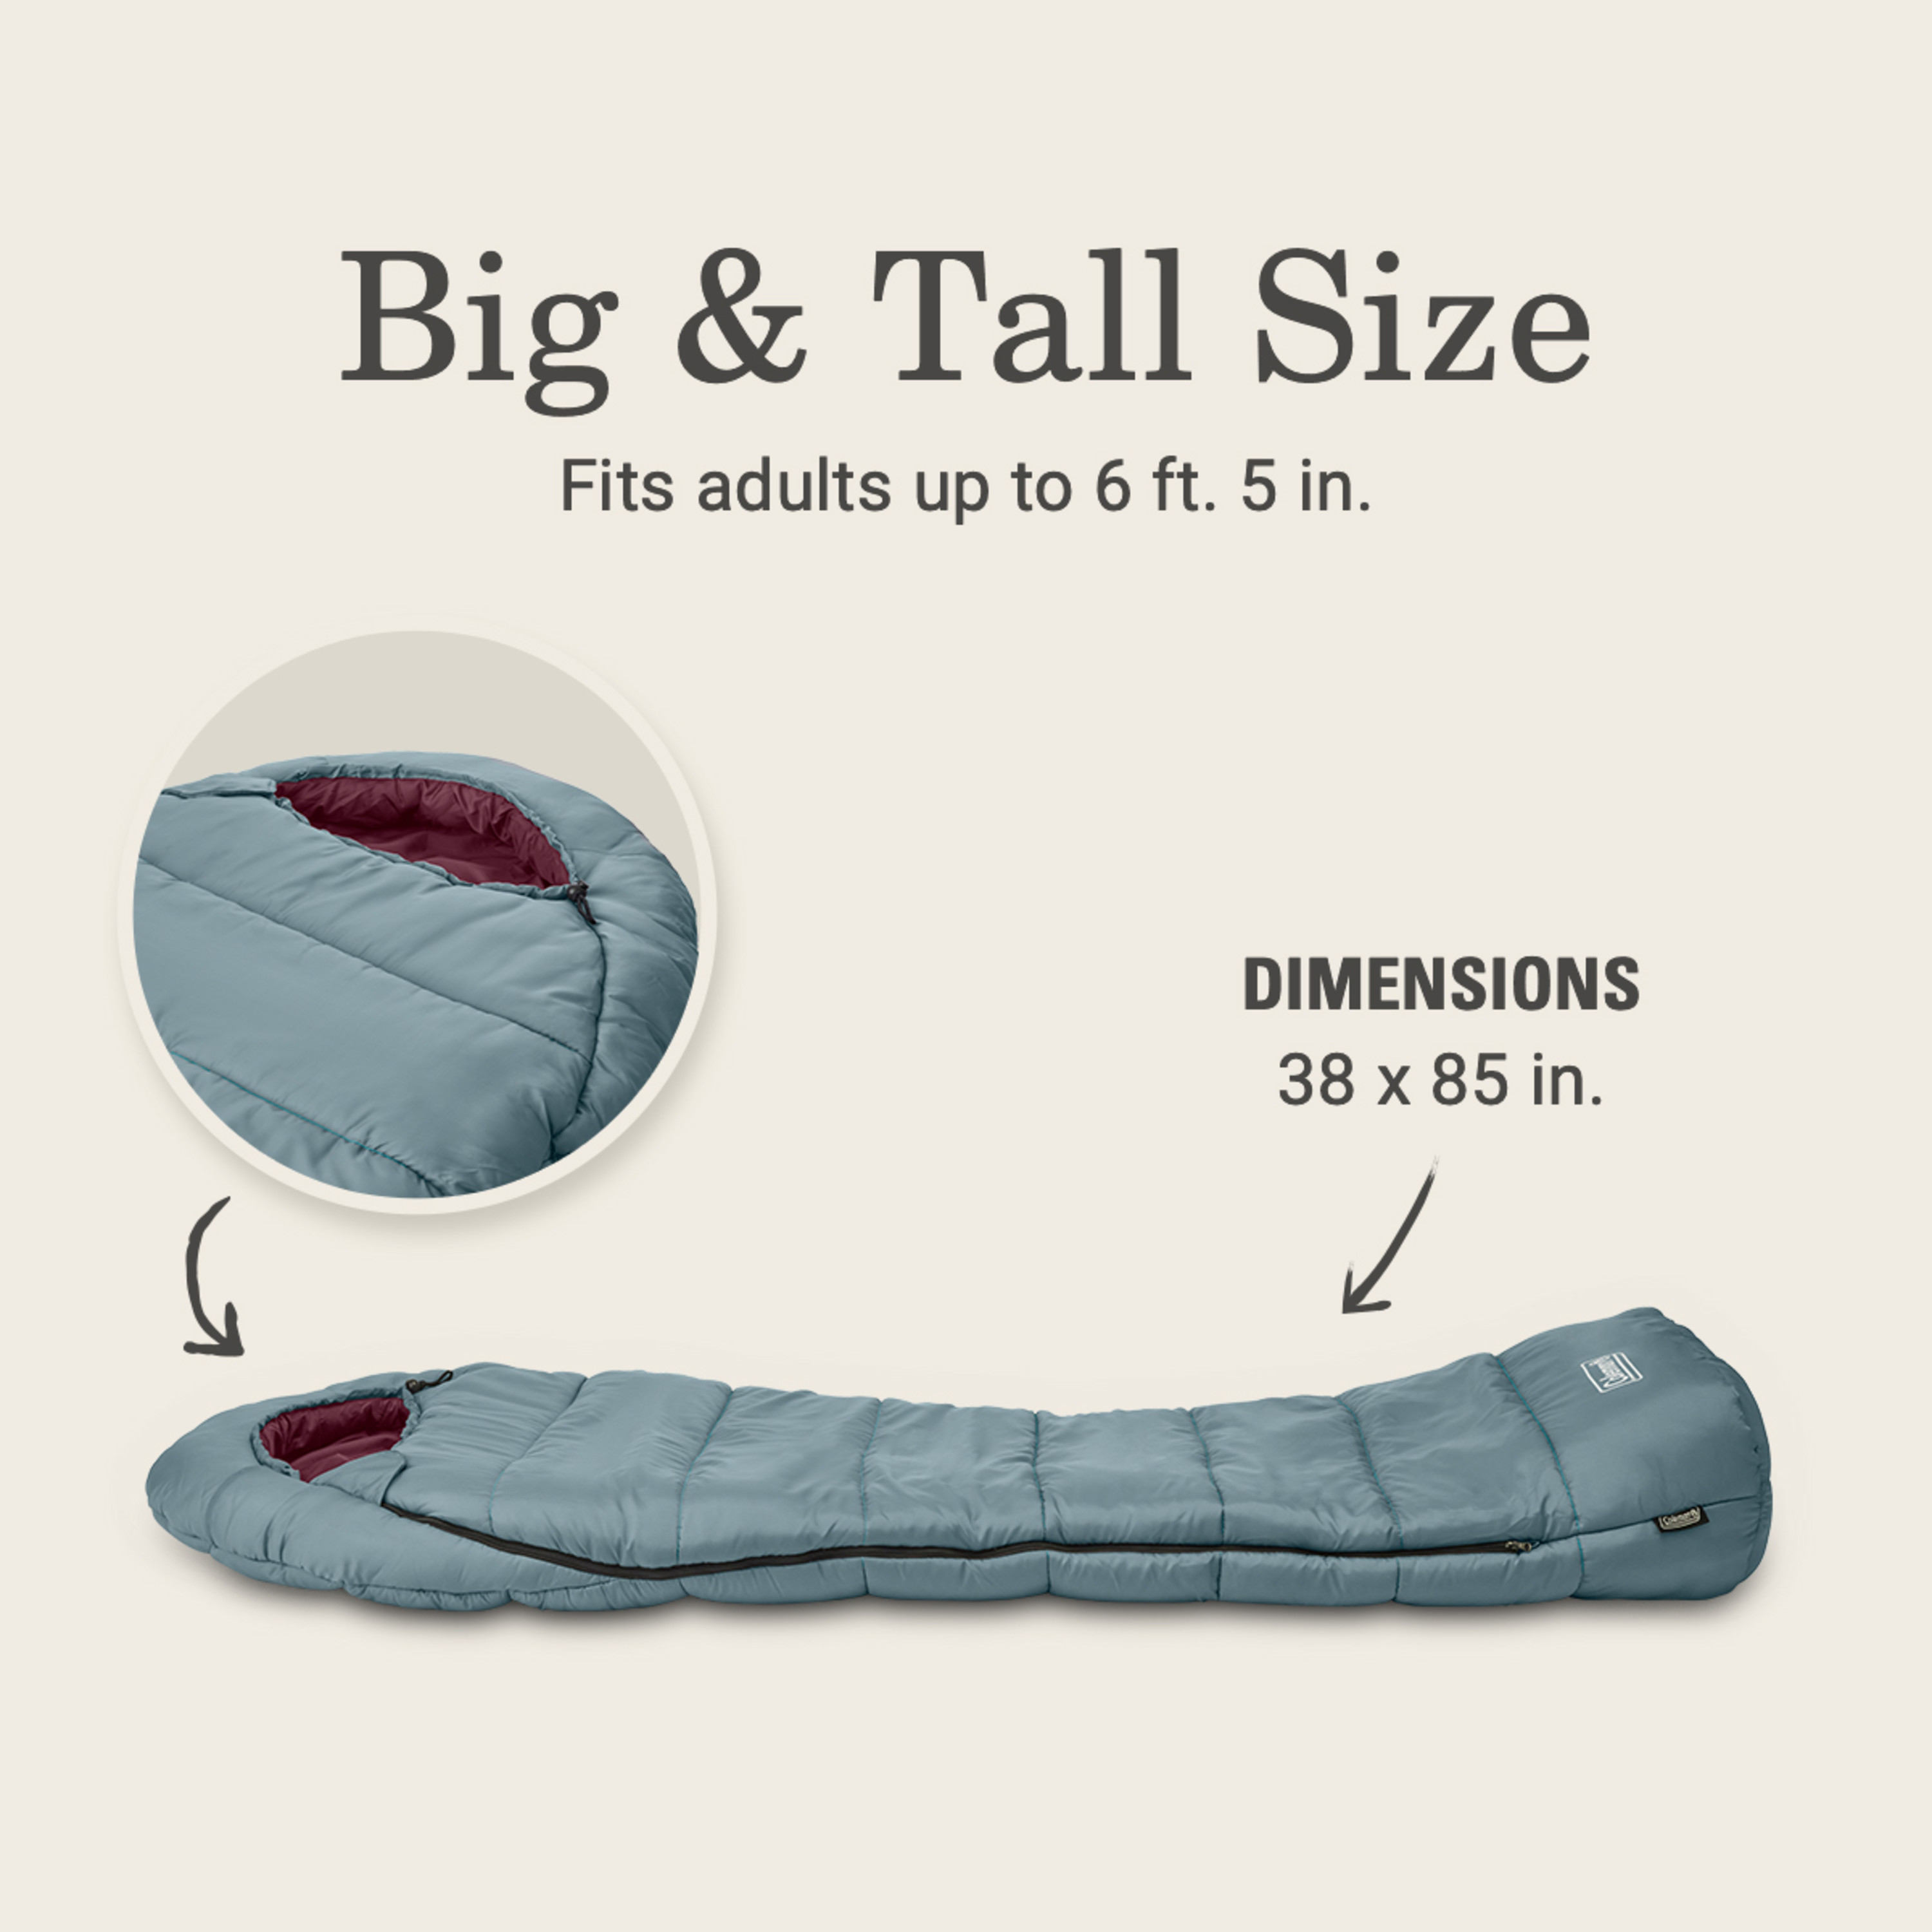 Coleman Tidelands 50-Degree Warm Weather Mummy Big and Tall Sleeping Bag, Gray - image 5 of 7